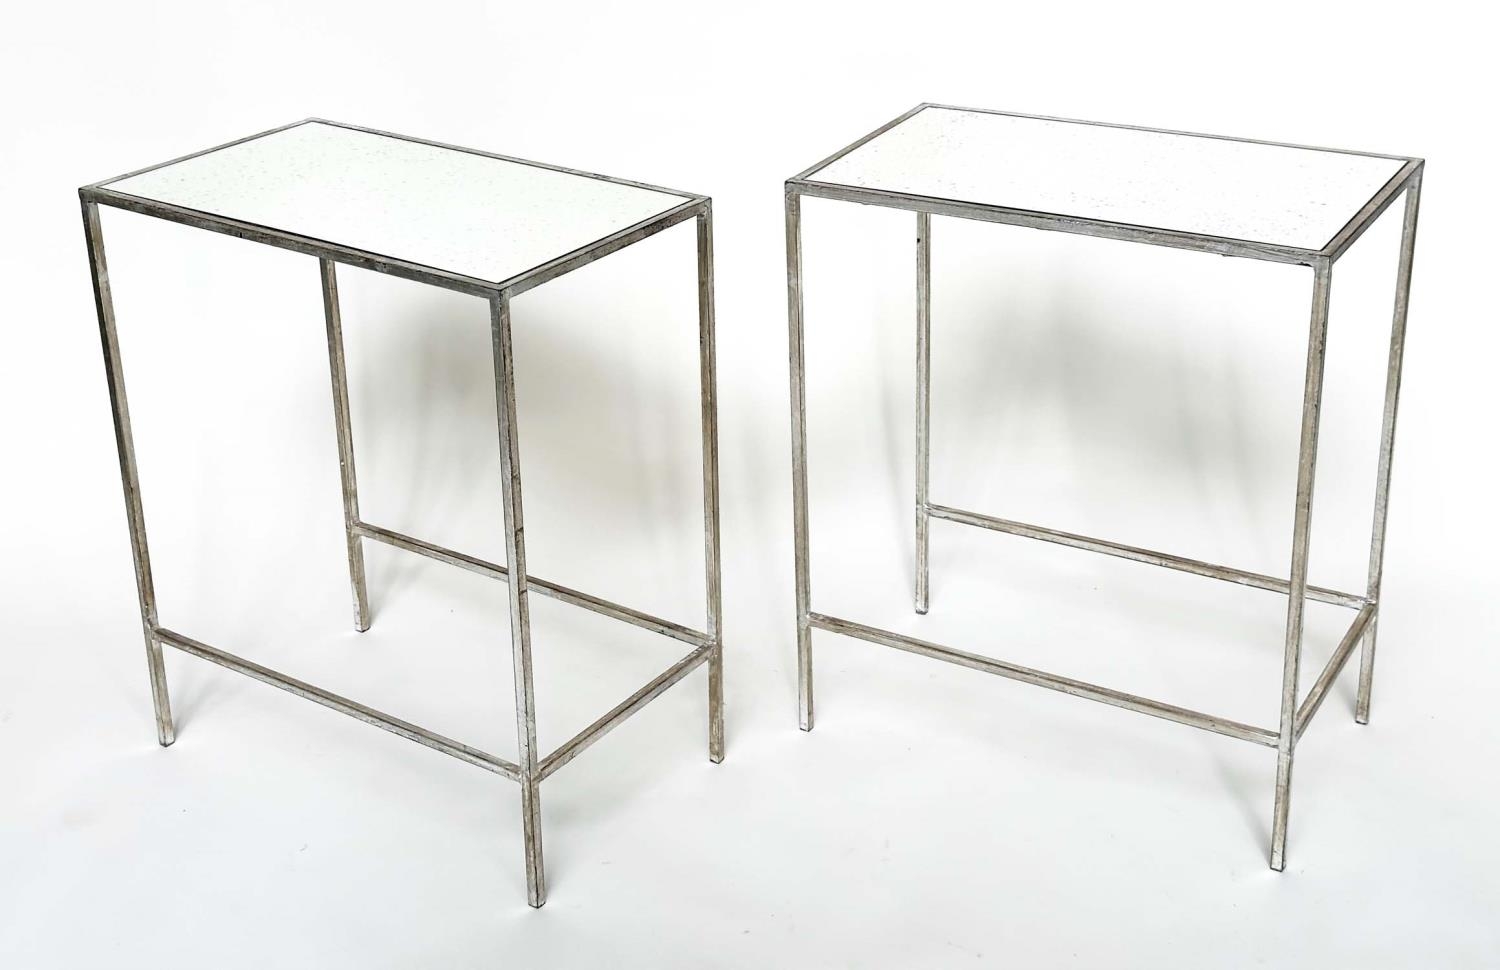 SIDE TABLES, a pair, French style, rectangular antique style leaf silvered metal framed and mirror - Image 2 of 6